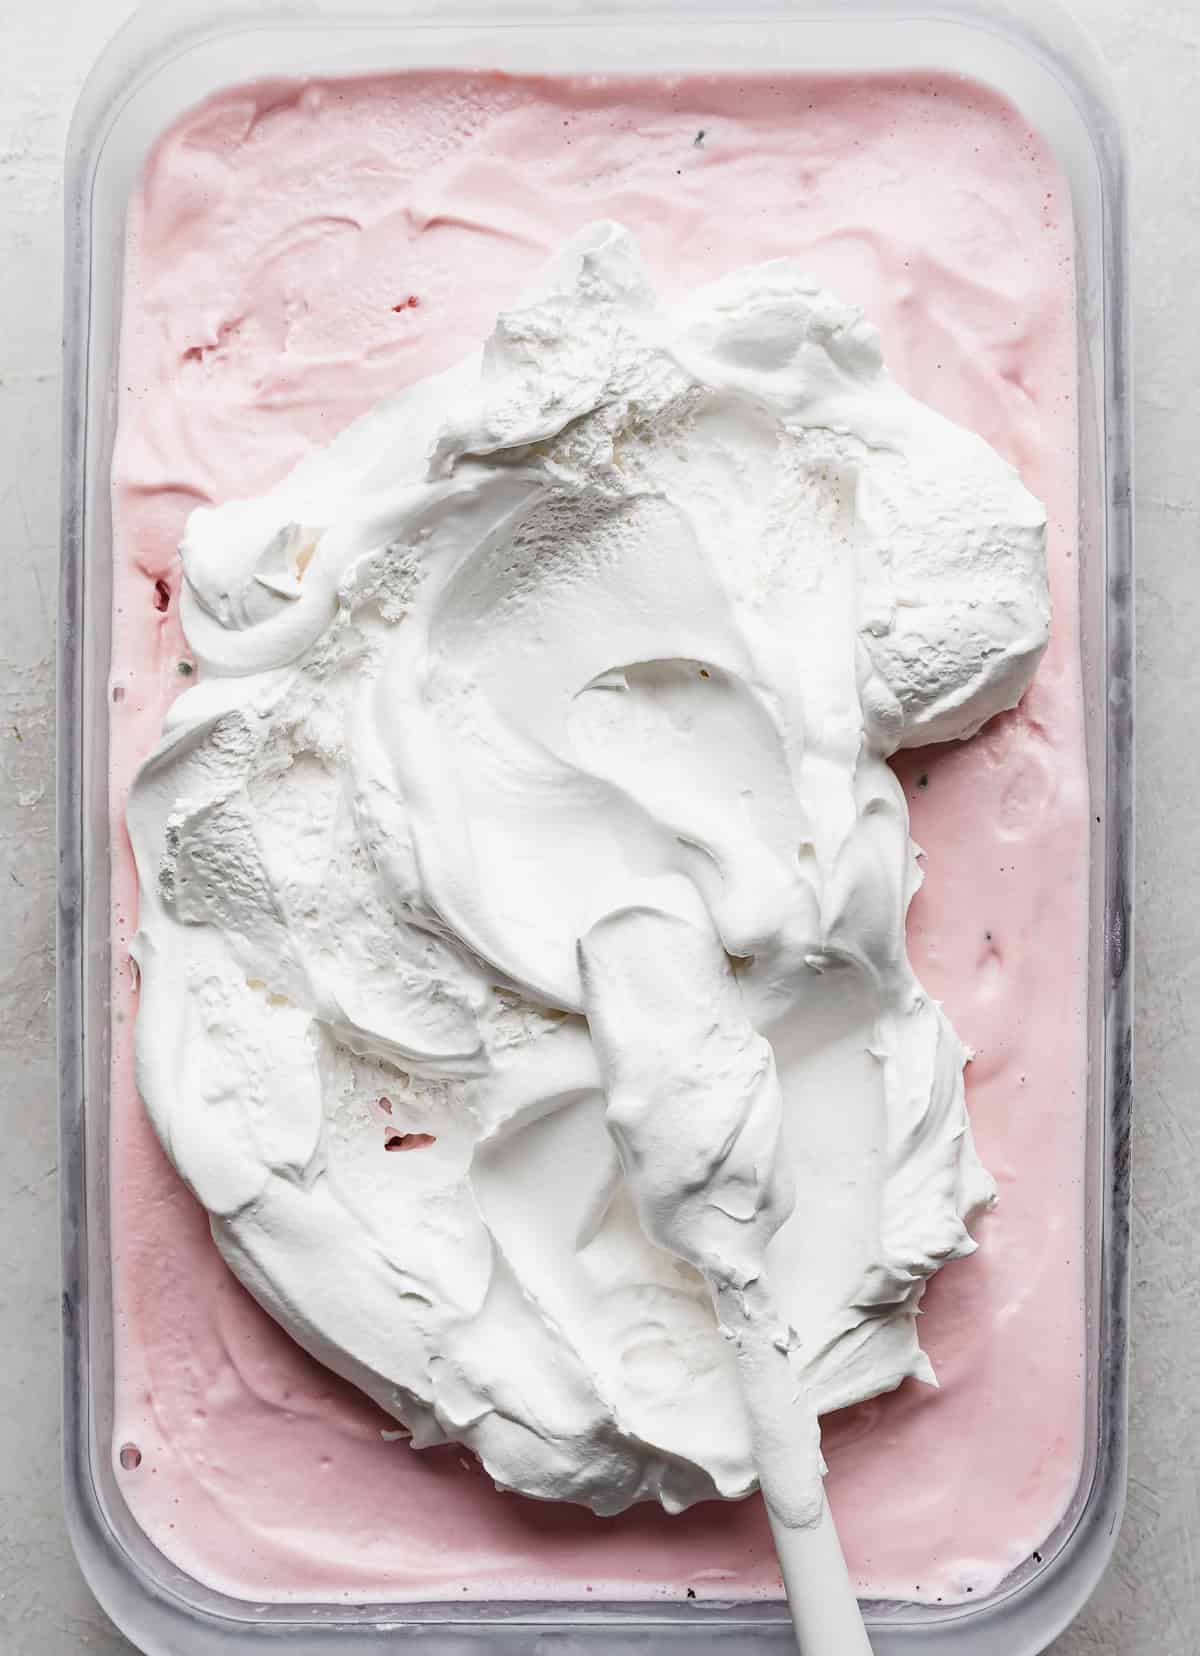 White cool whip portioned in the center of pink peppermint ice cream in a rectangular dish.